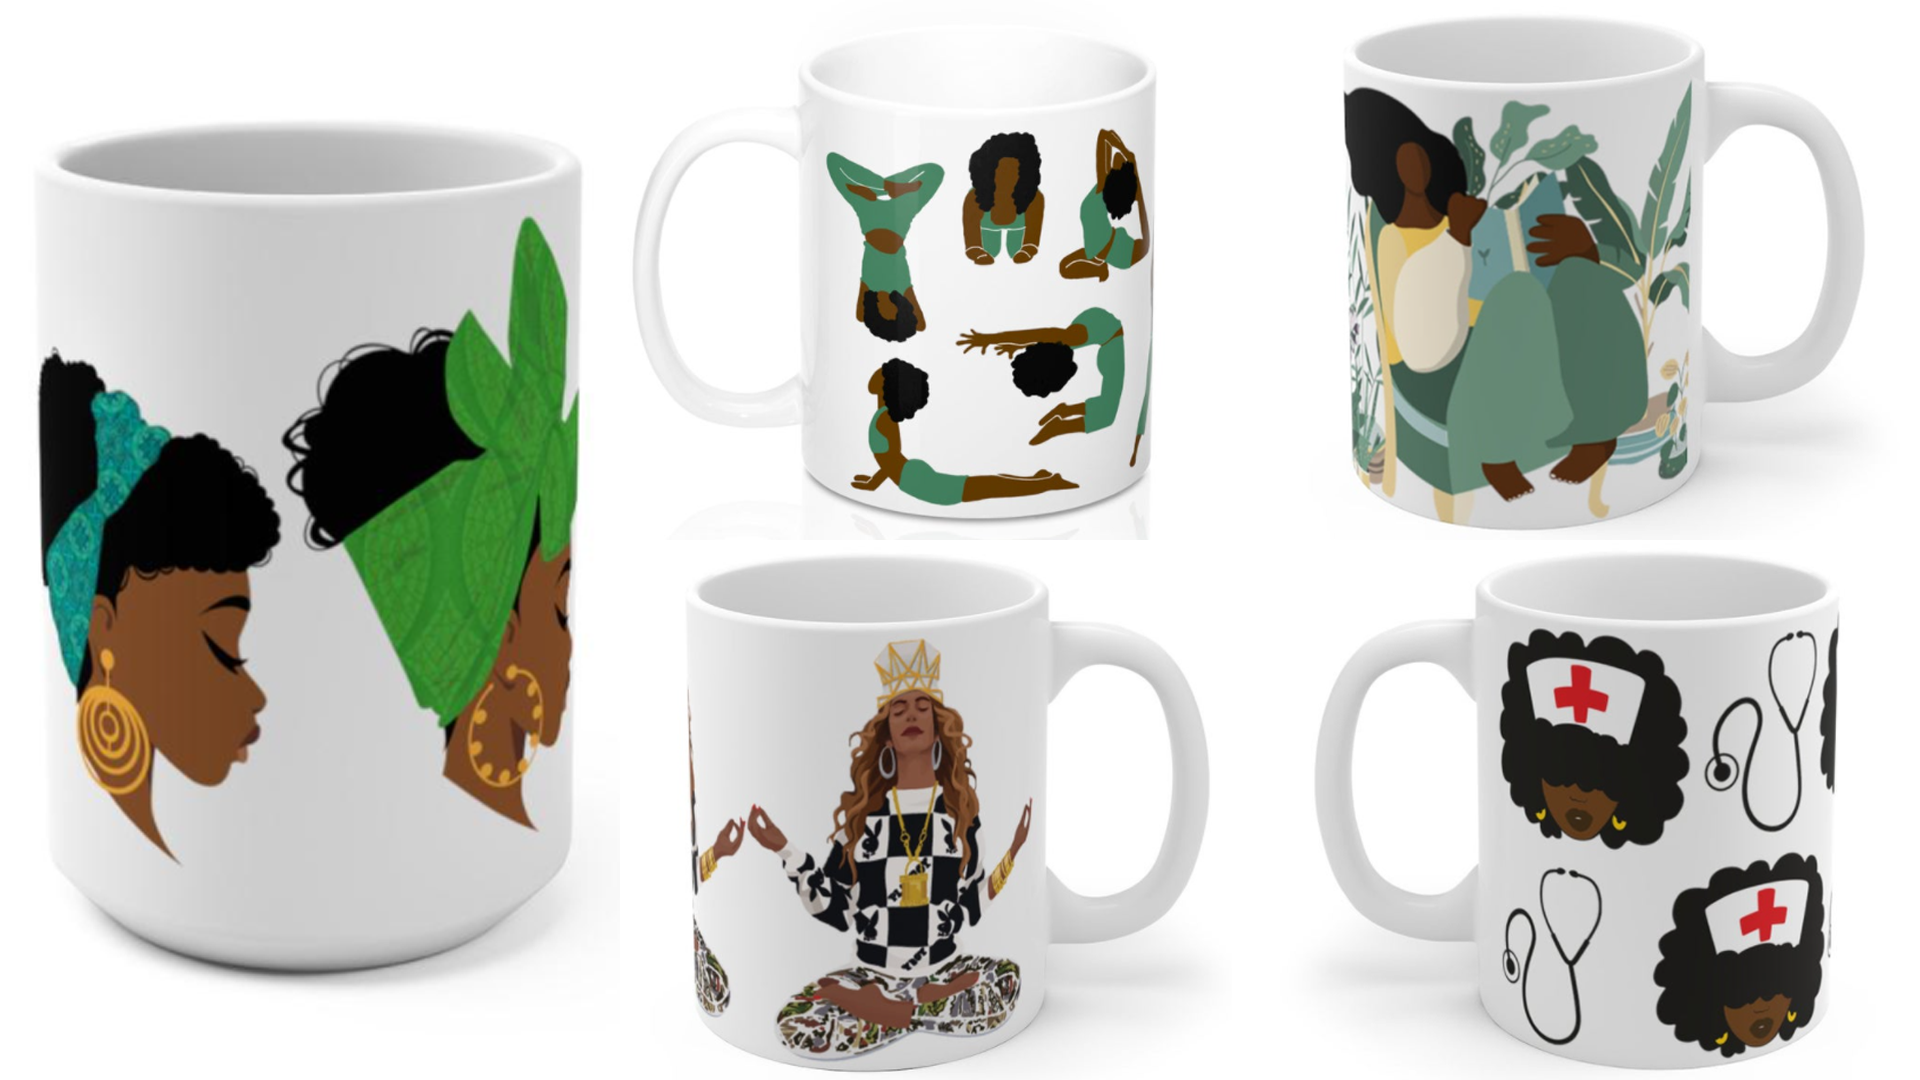 Gift idea for her: The Trini Gee mugs on Etsy